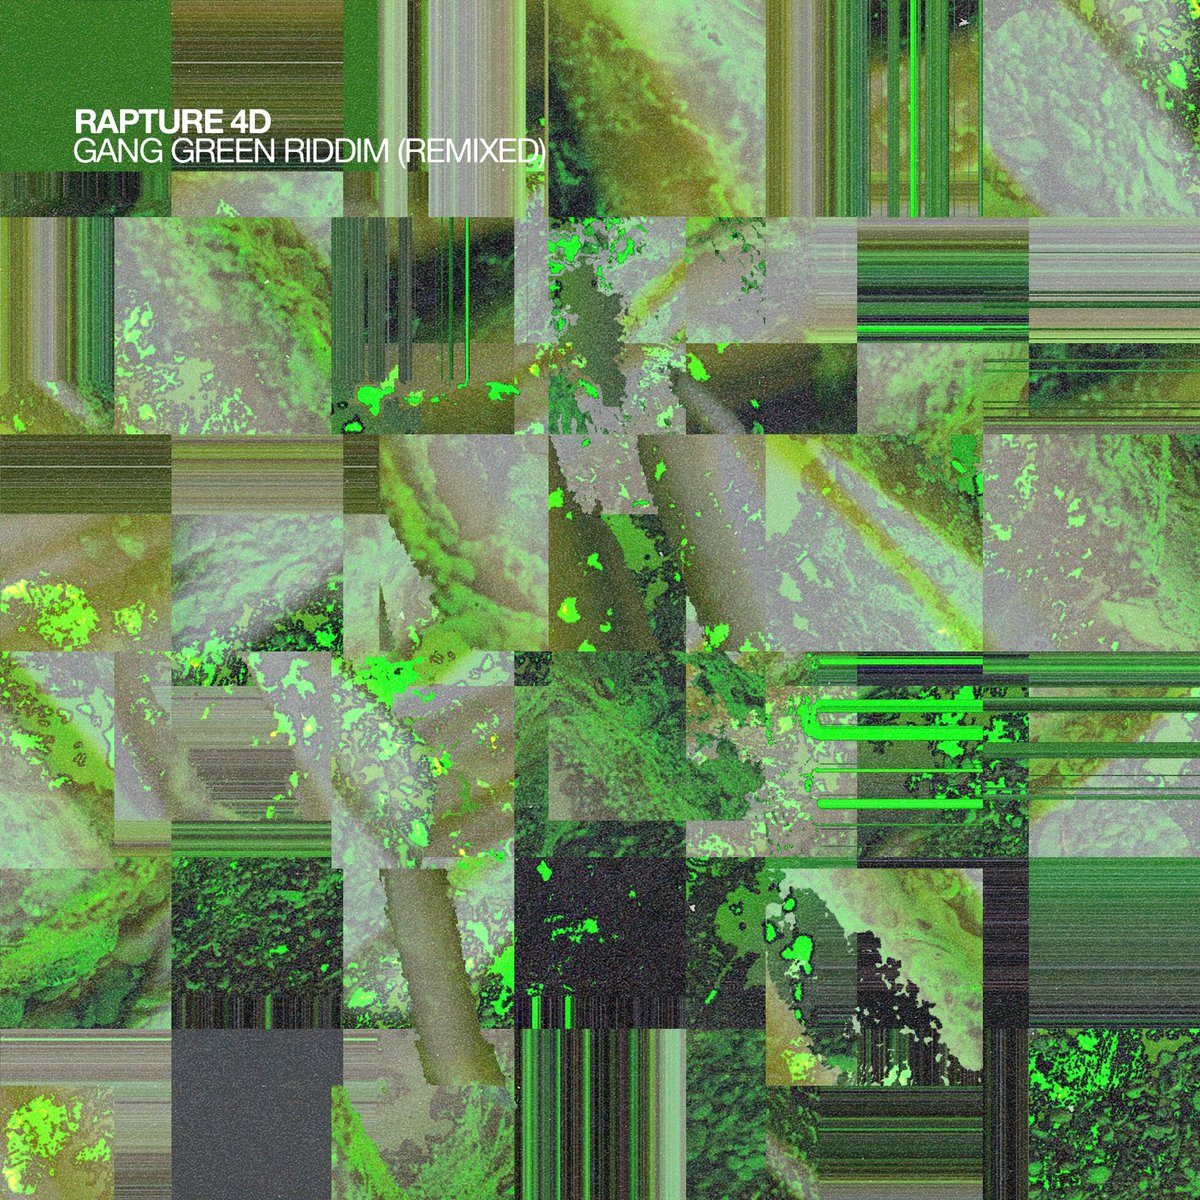 surprise (!) — @Rapture_4D’s dubplate classic, Gang Green Riddim, now available digitally for the first time this Friday, complete w/ two new remixes by @MADDISH1 + @BetonBrut_ 🔊

the last from CYTE RECS for 2023 — rapture4d.bandcamp.com/album/gang-gre…